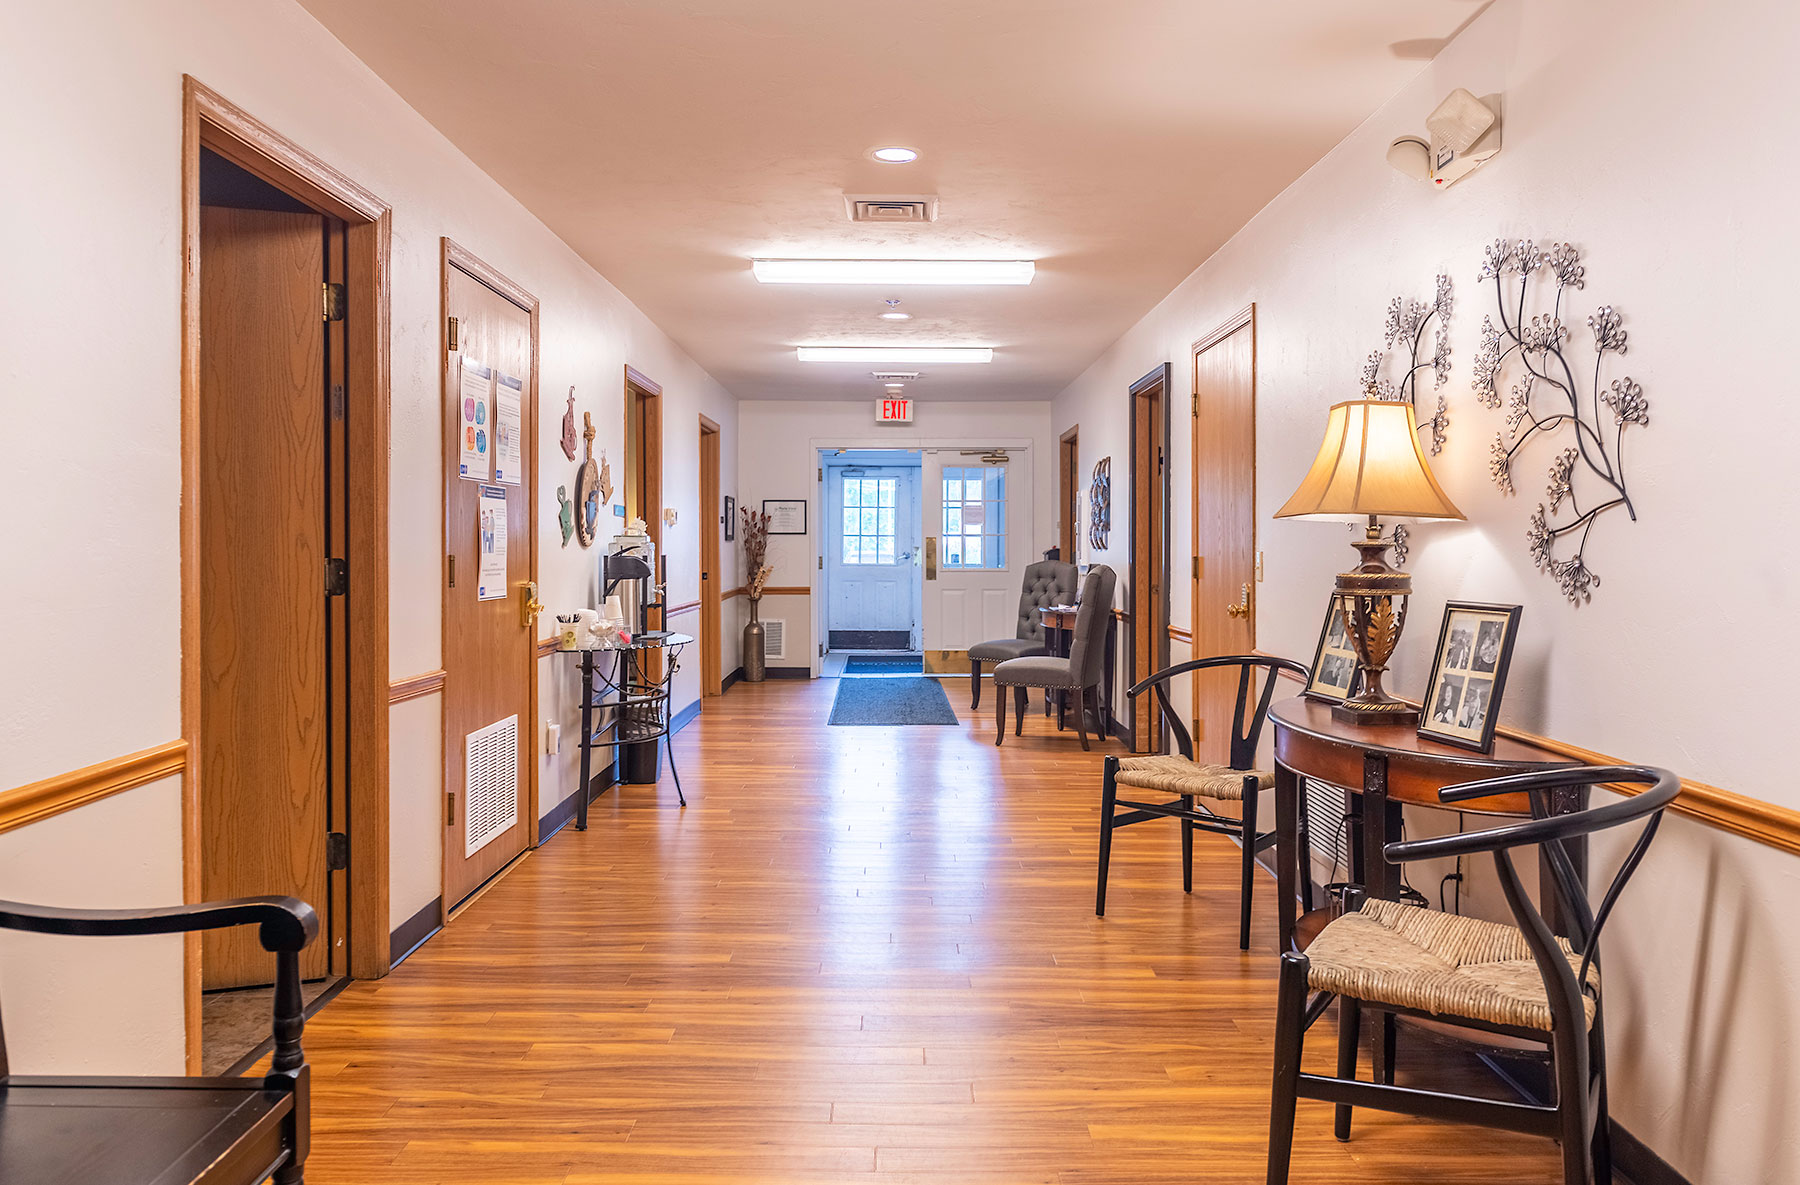 Marla Vista Assisted Living Entry Area